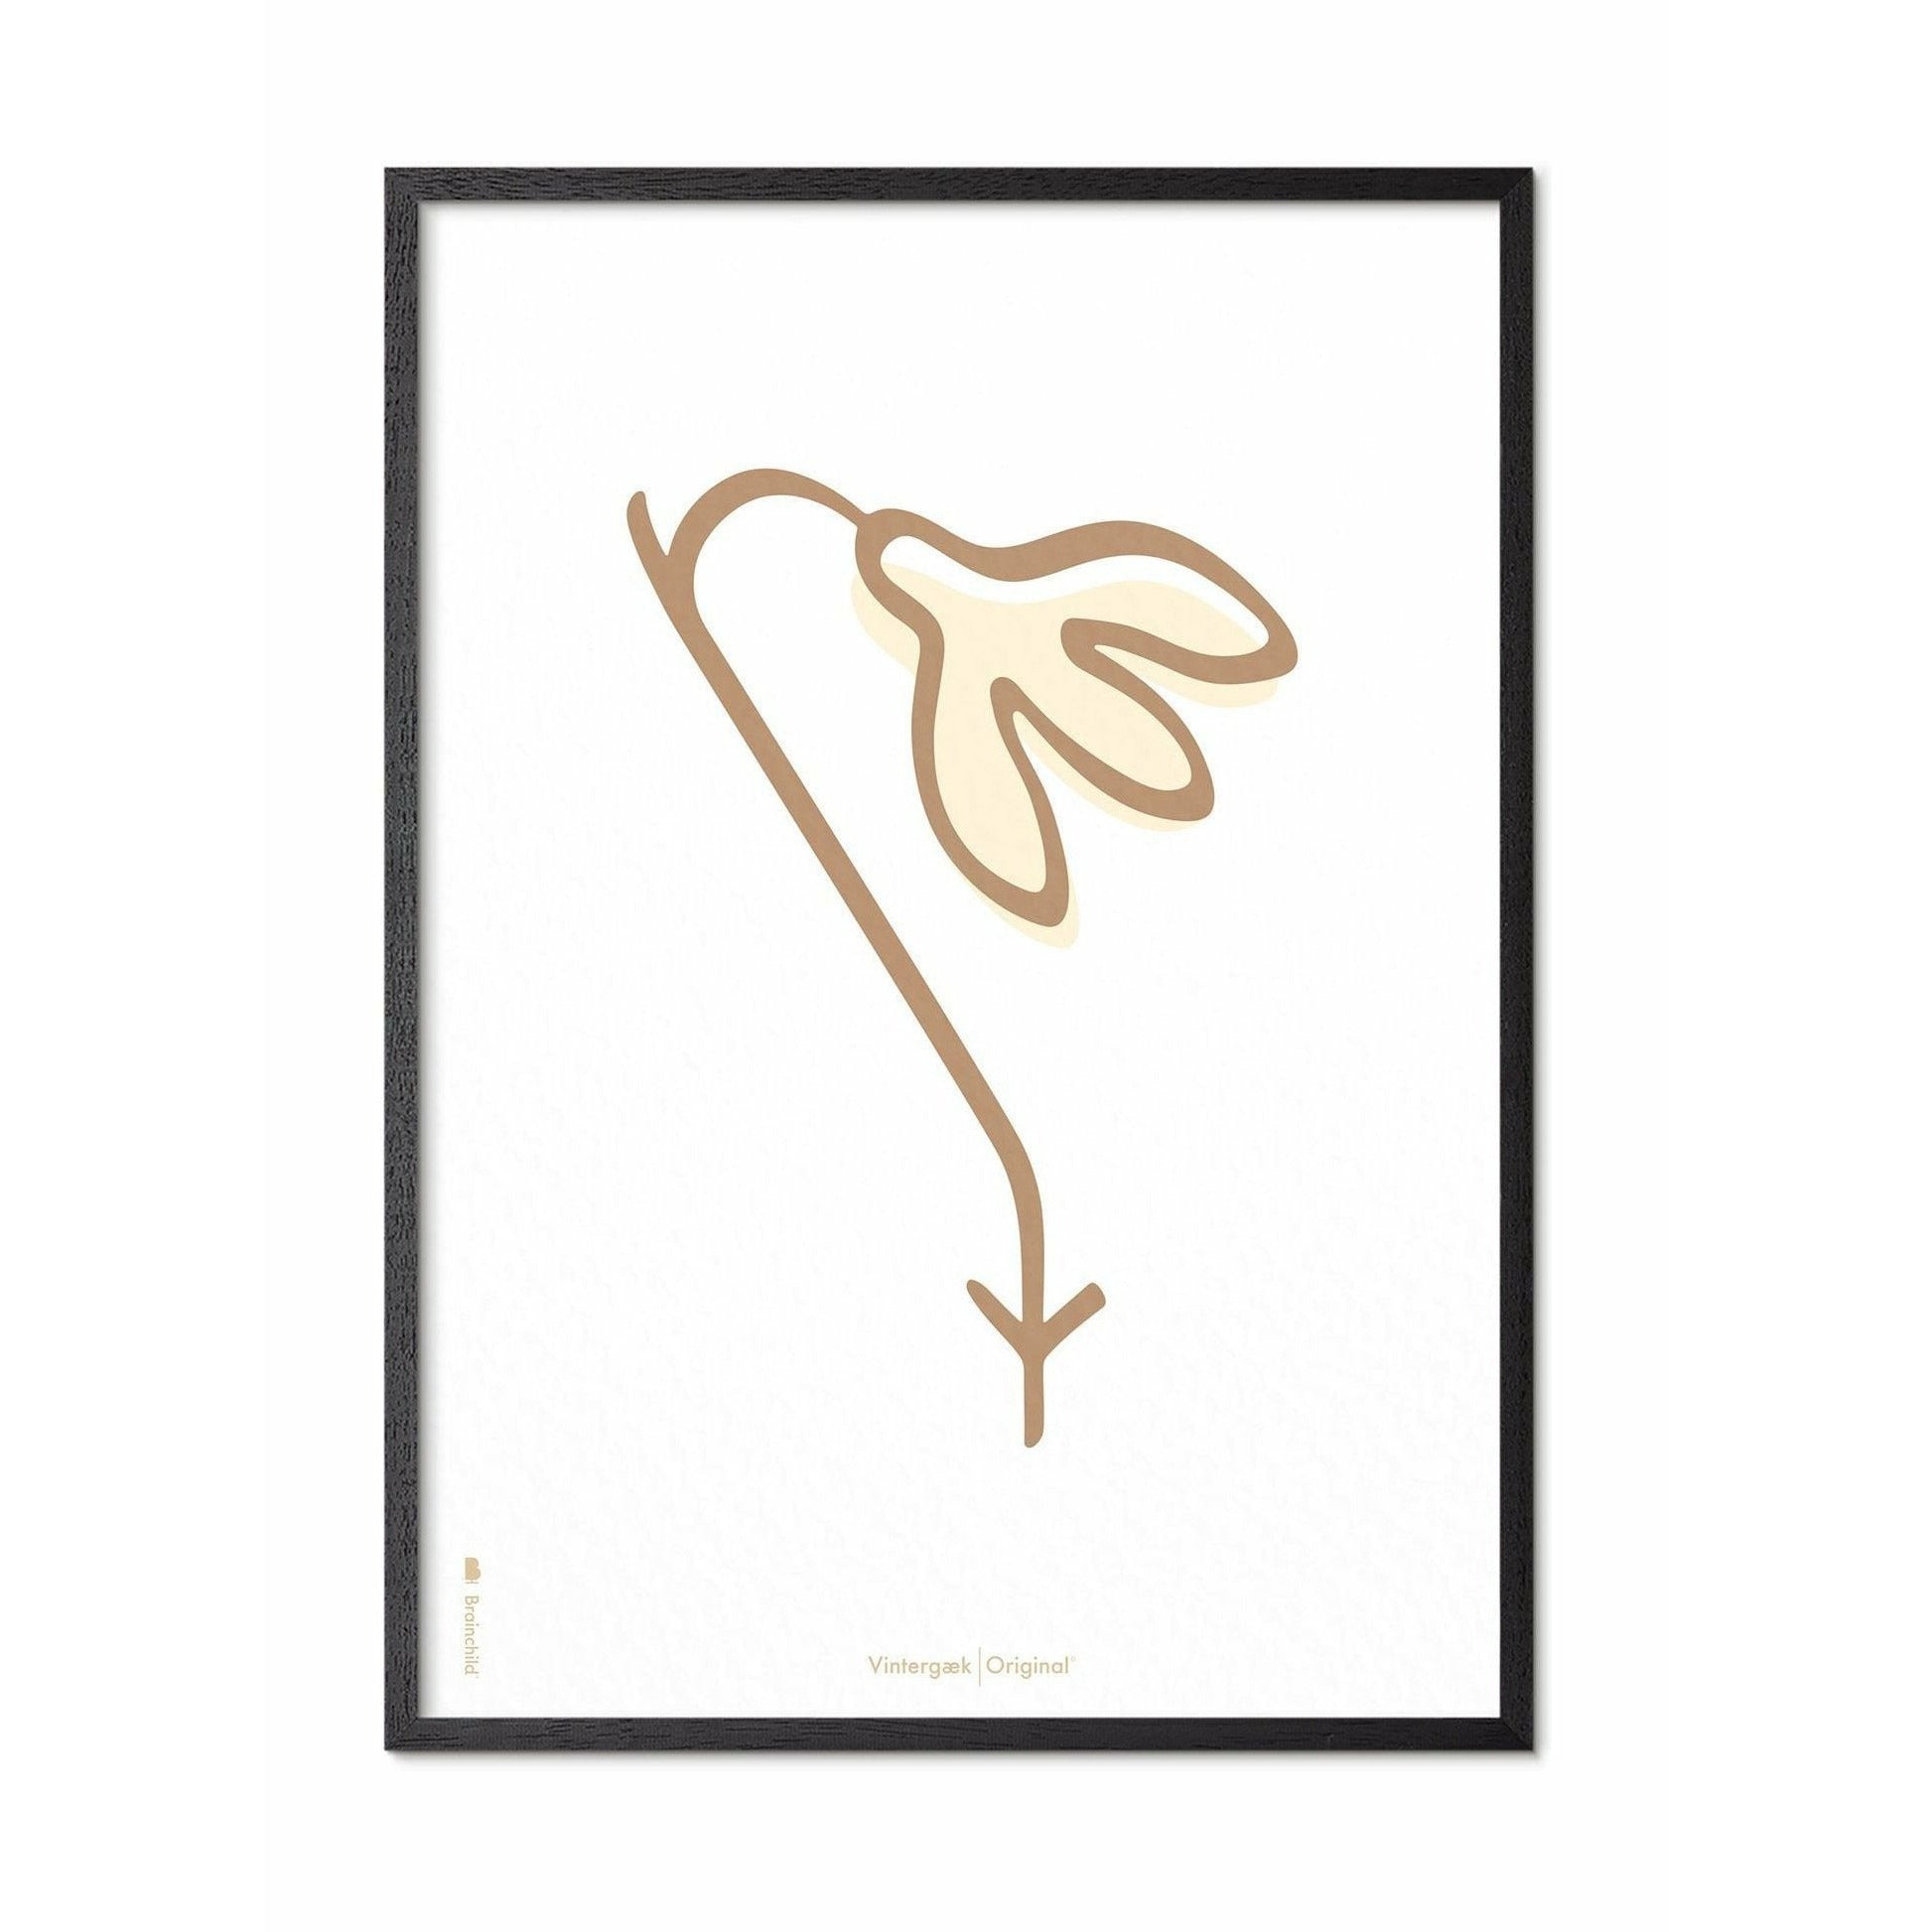 Brainchild Snowdrop Line Poster, Frame In Black Lacquered Wood A5, White Background